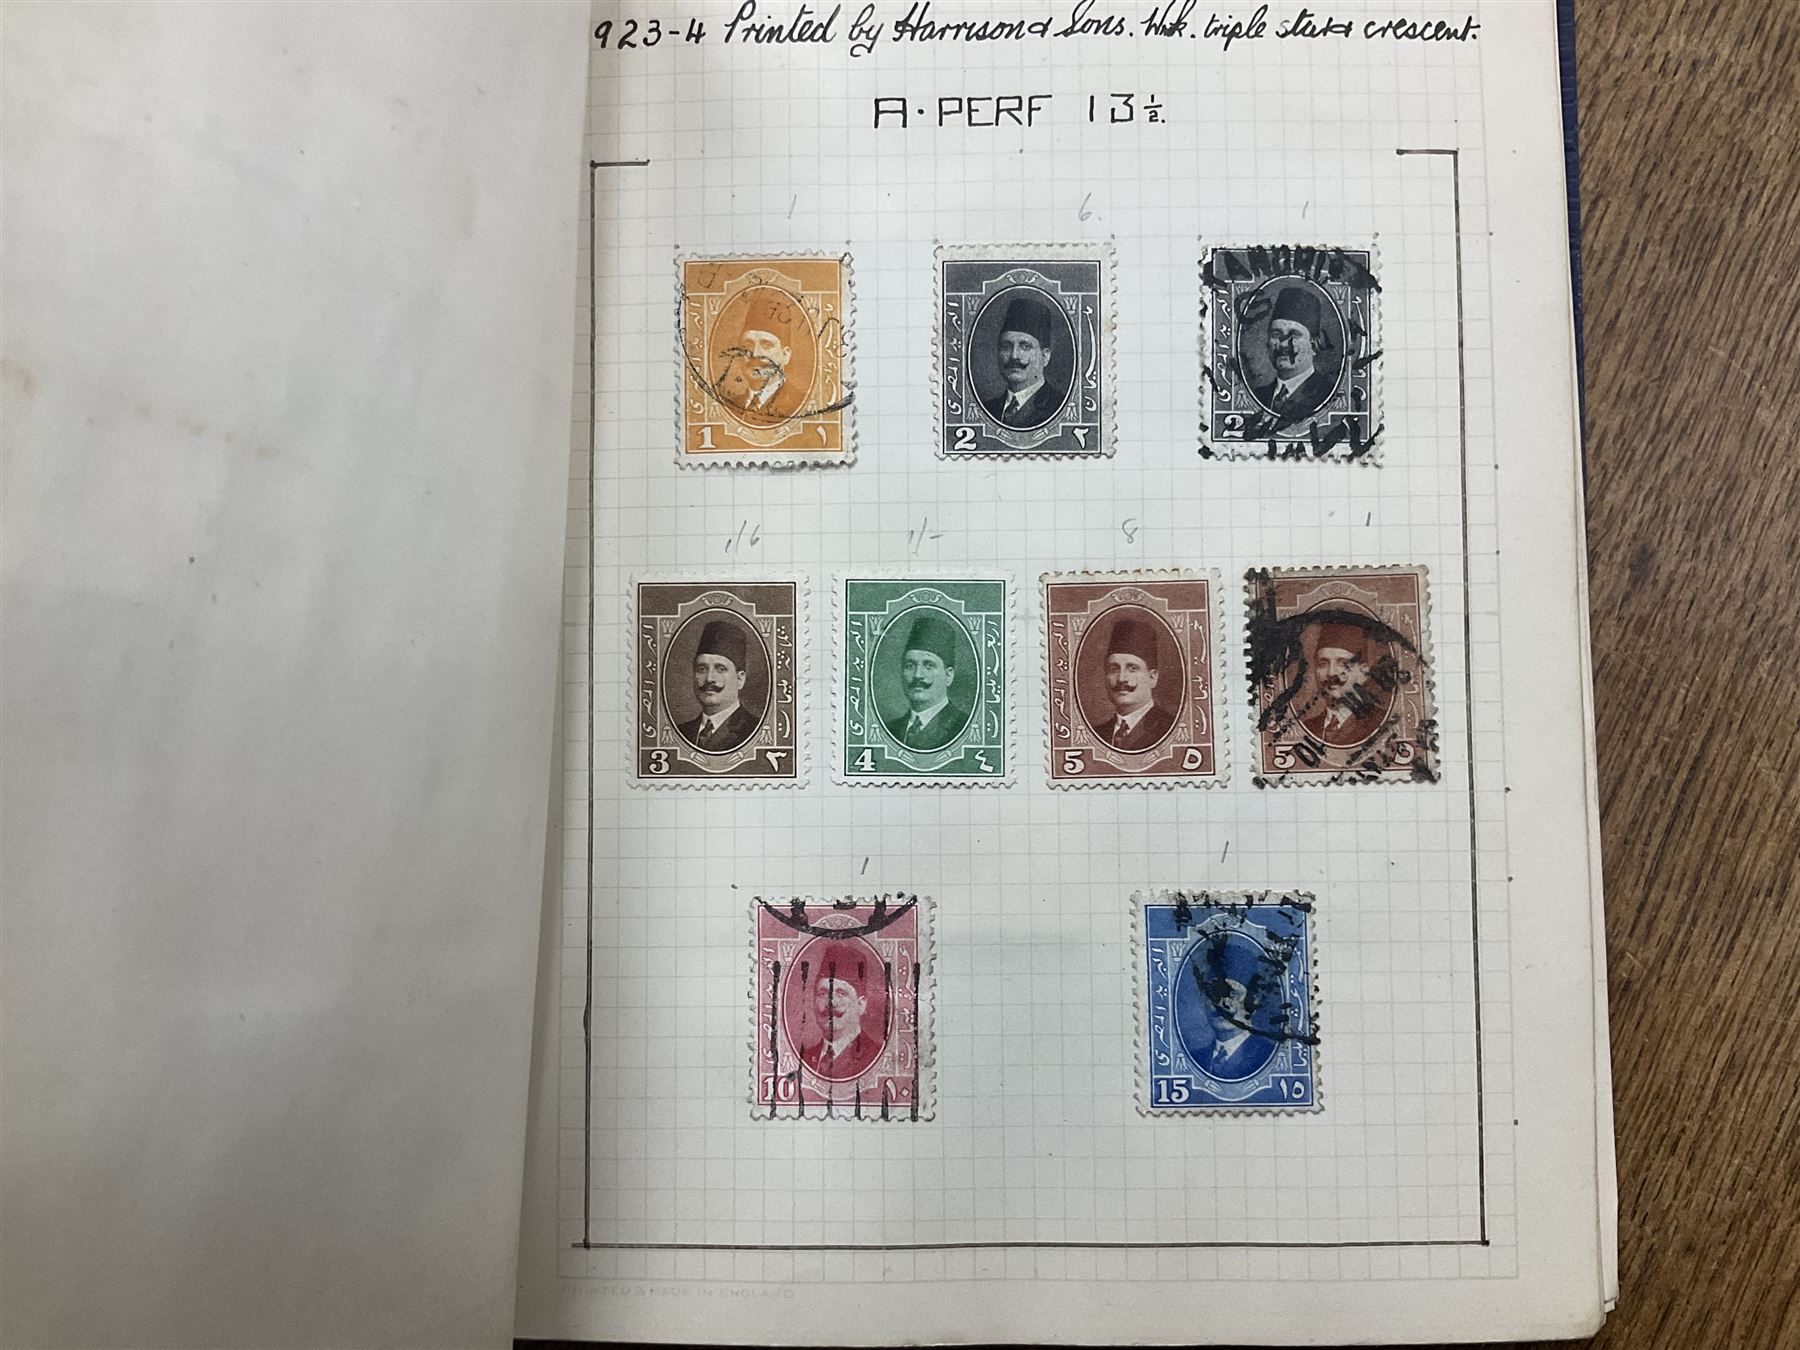 Egypt 1866 and later stamps - Image 694 of 761